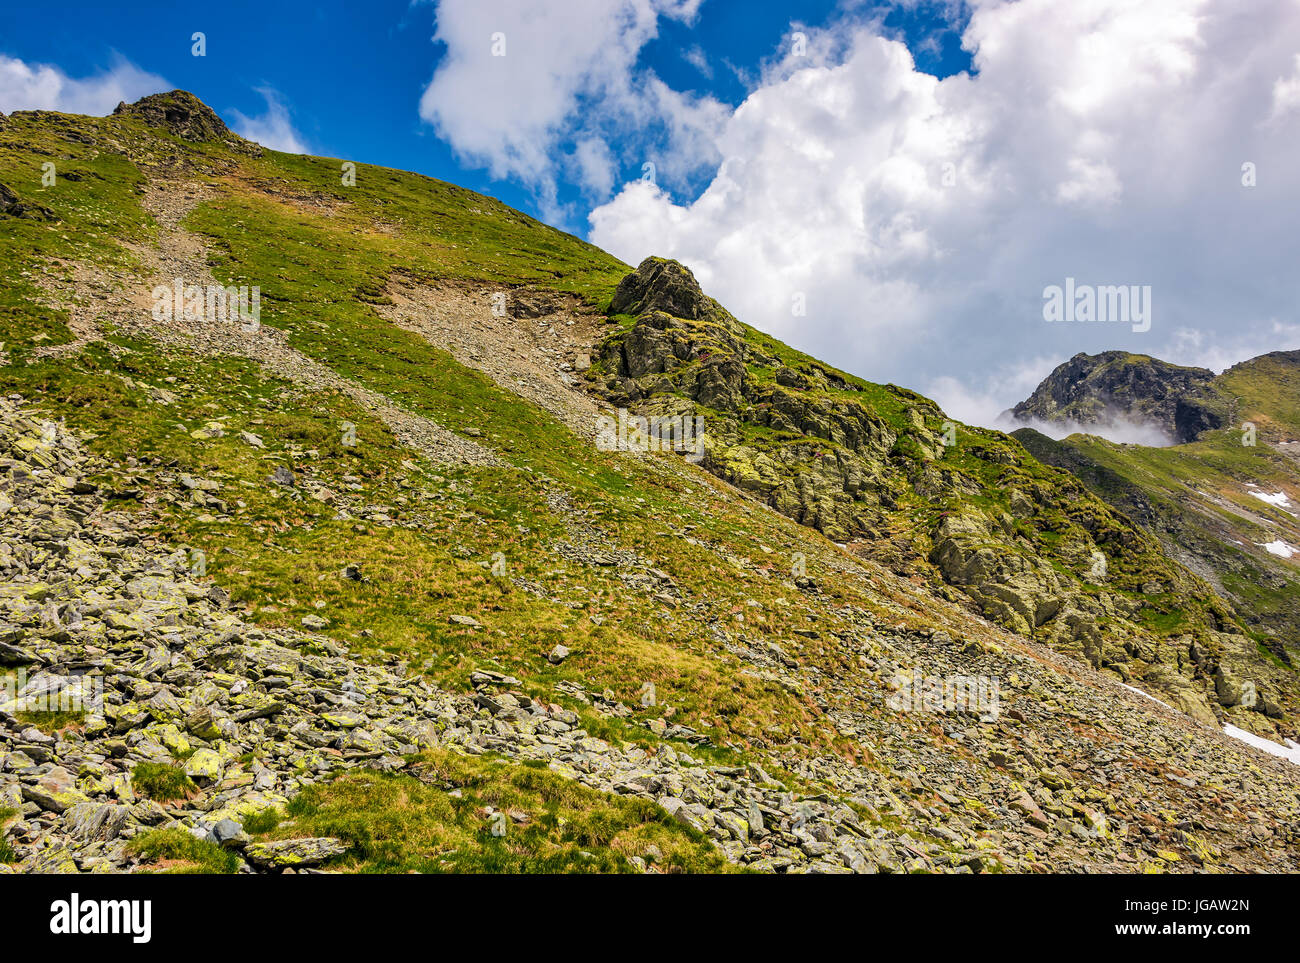 edge of steep slope on rocky hillside in cloudy weather. dramatic scenery in mountains Stock Photo